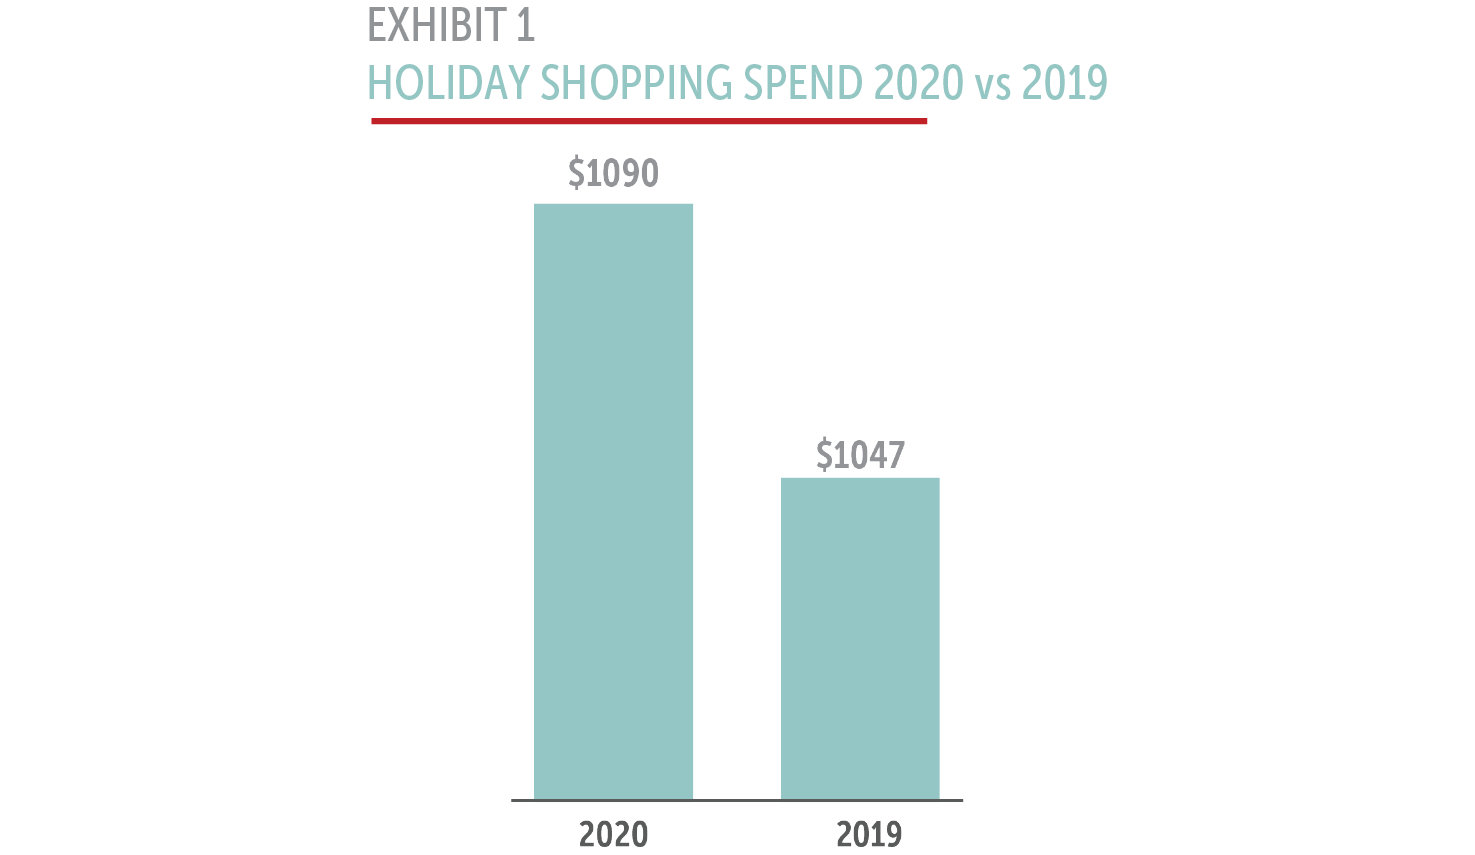 Holiday shopping spend levels 2020 vs 2019